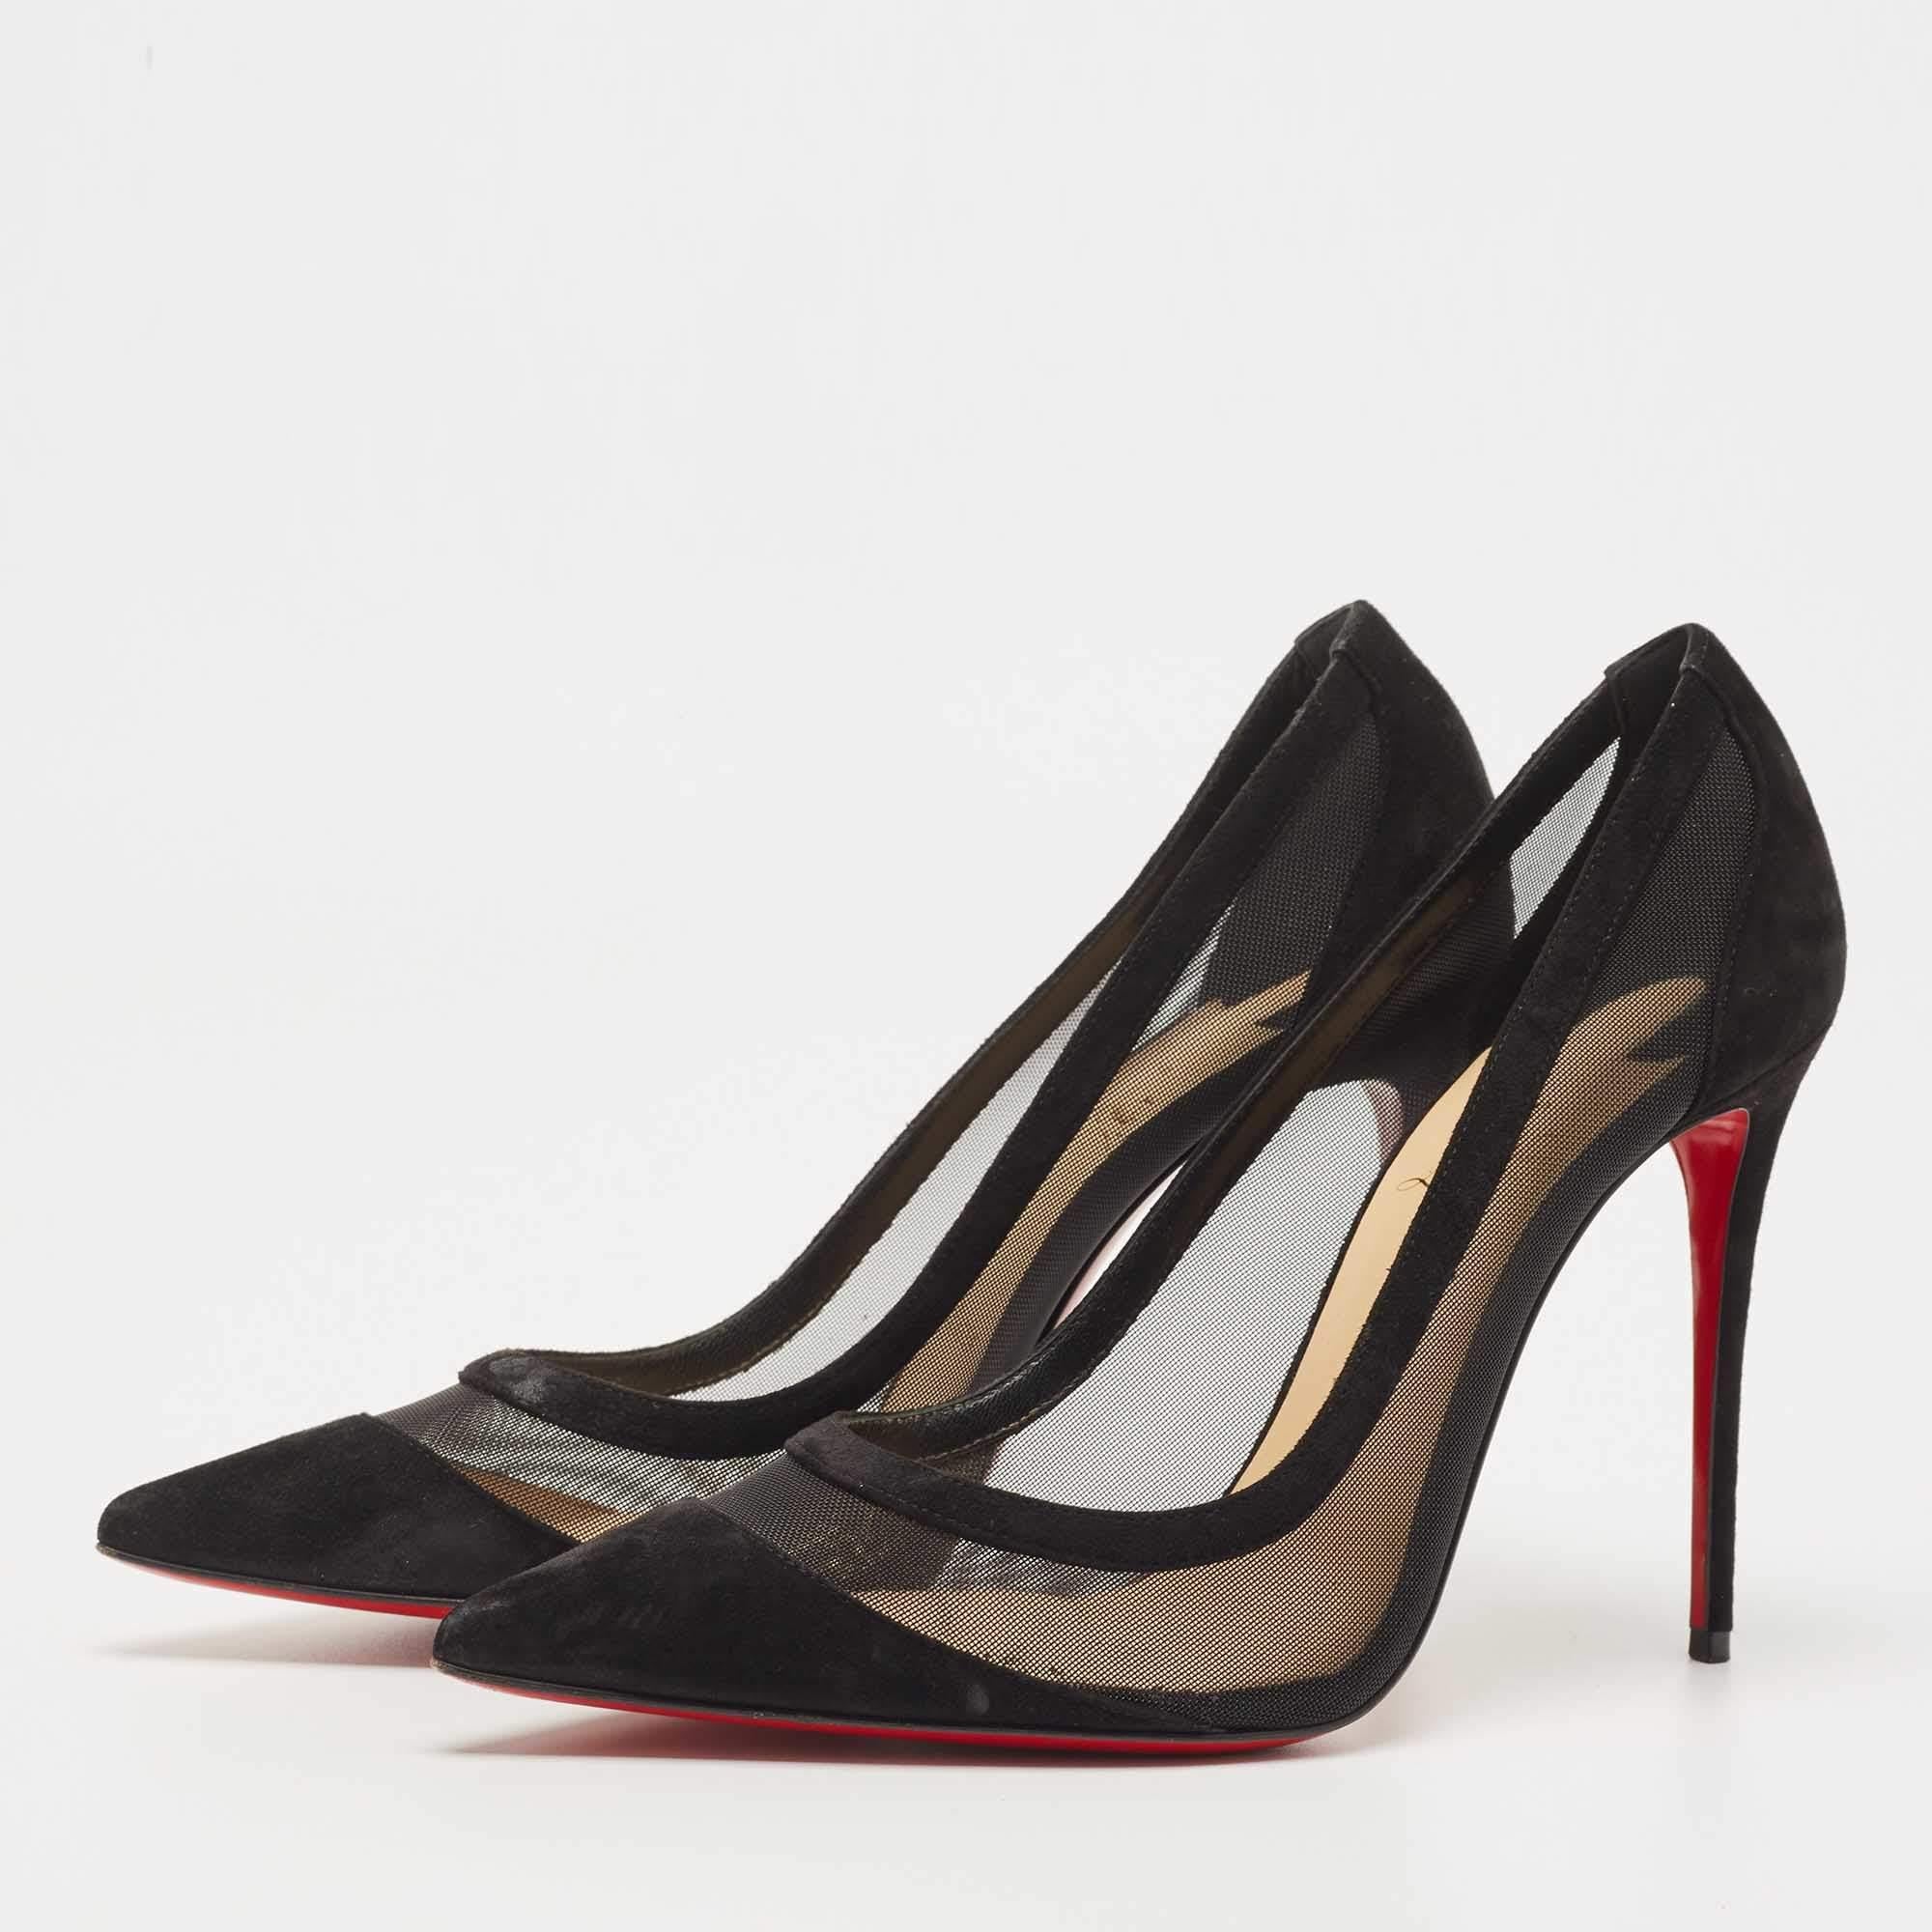 Exhibit an elegant style with this pair of pumps. These elegant shoes are crafted from quality materials. They are set on durable soles and sleek heels.

Includes: Original Dustbag, Original Box, Extra Heels